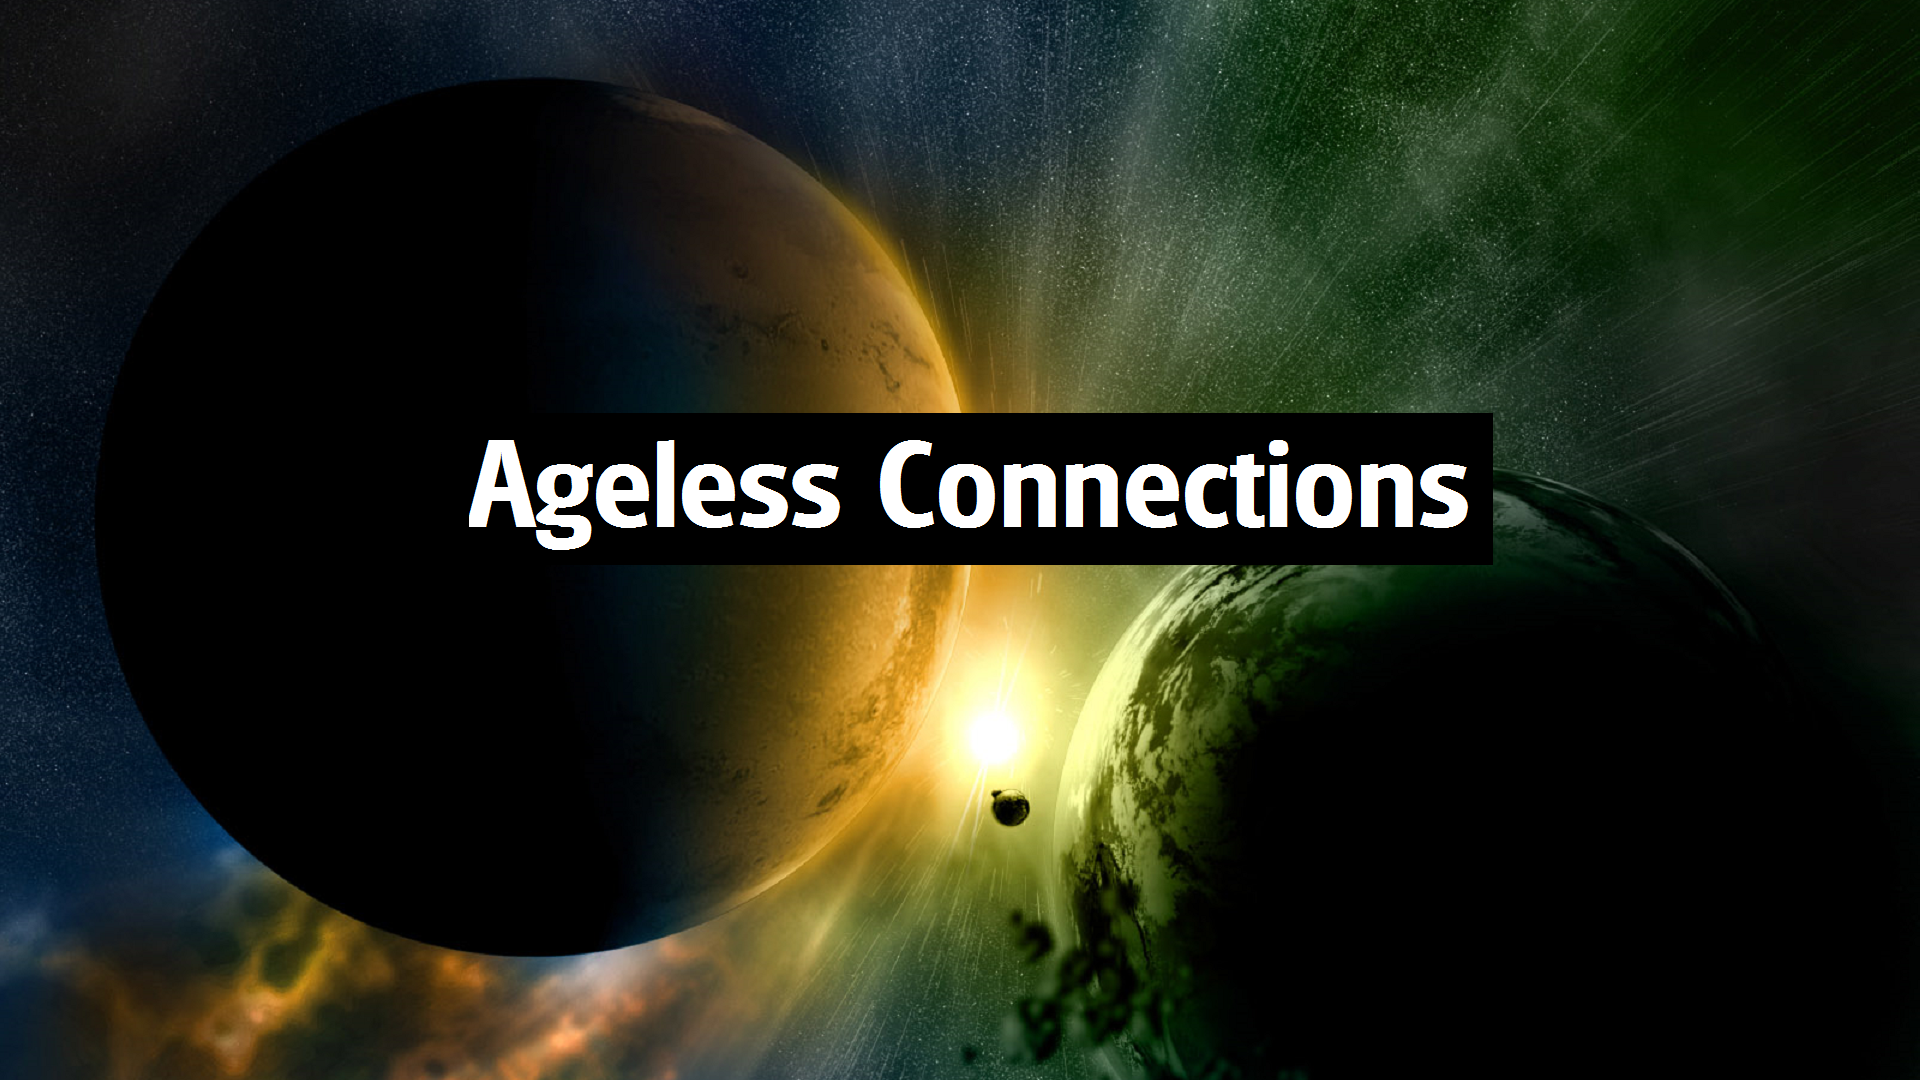 Ageless Connections